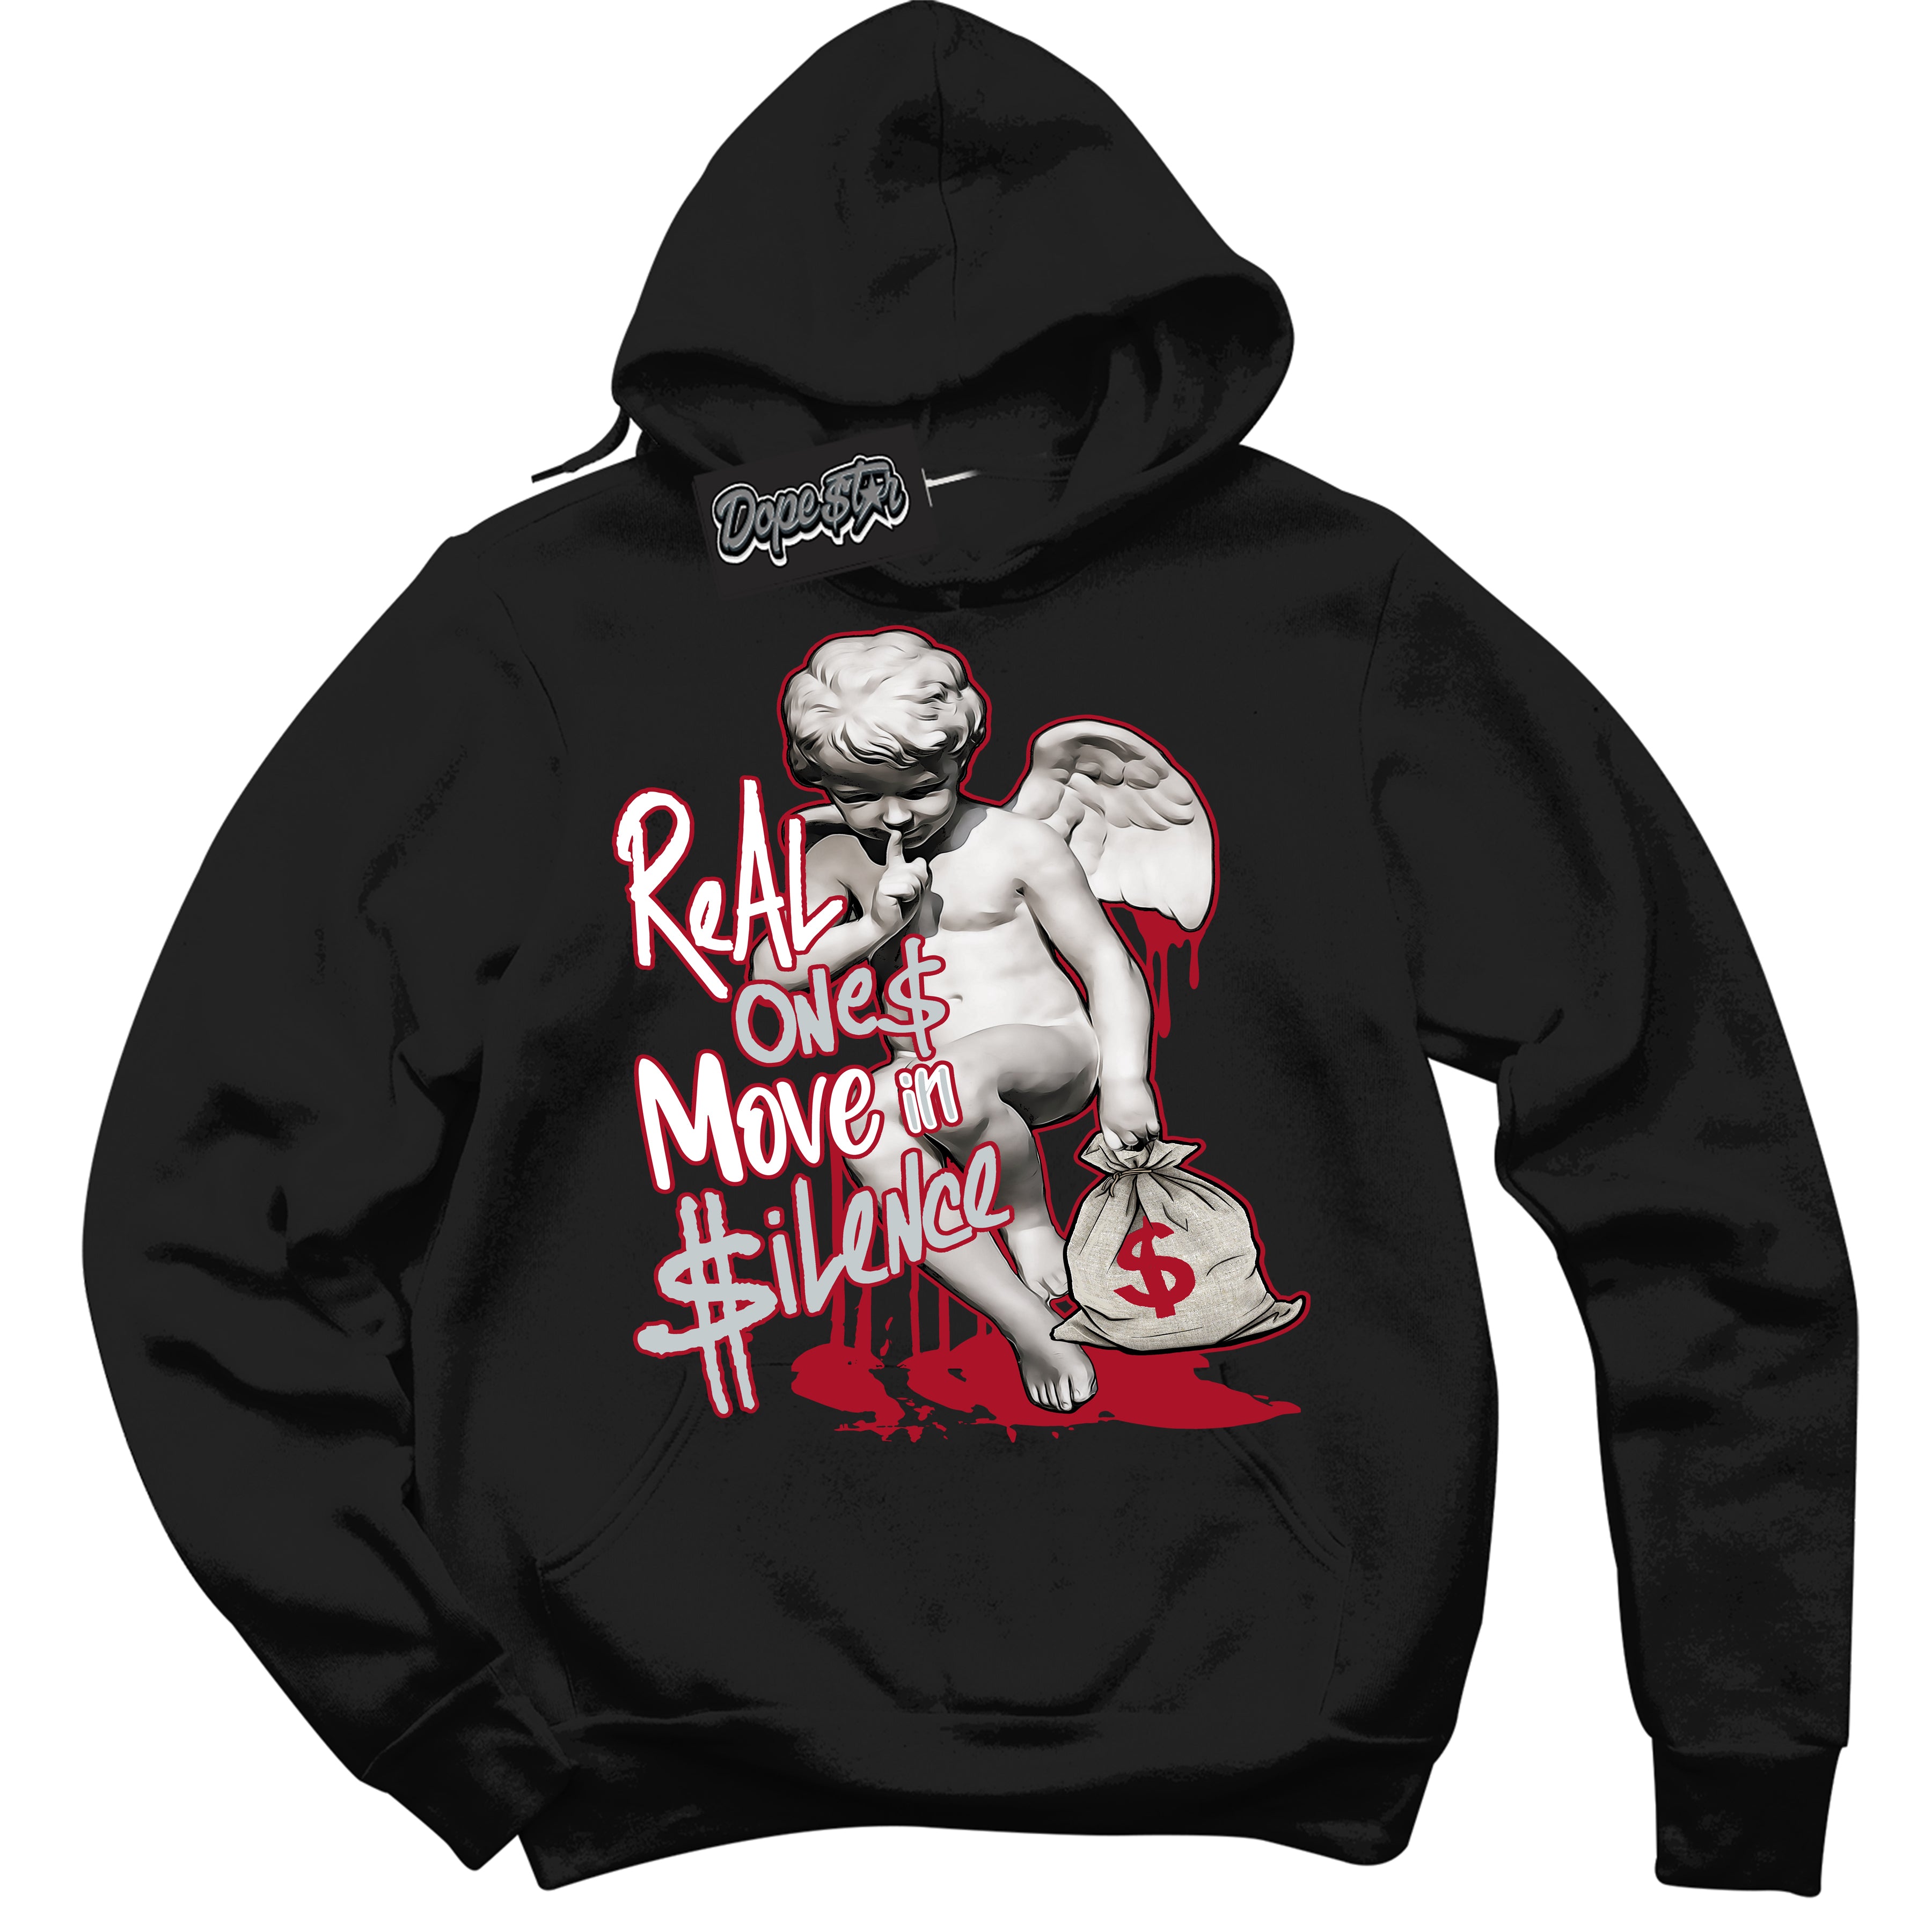 Cool Black Hoodie with “ Real Ones Cherub ”  design that Perfectly Matches  Reverse Ultraman Sneakers.